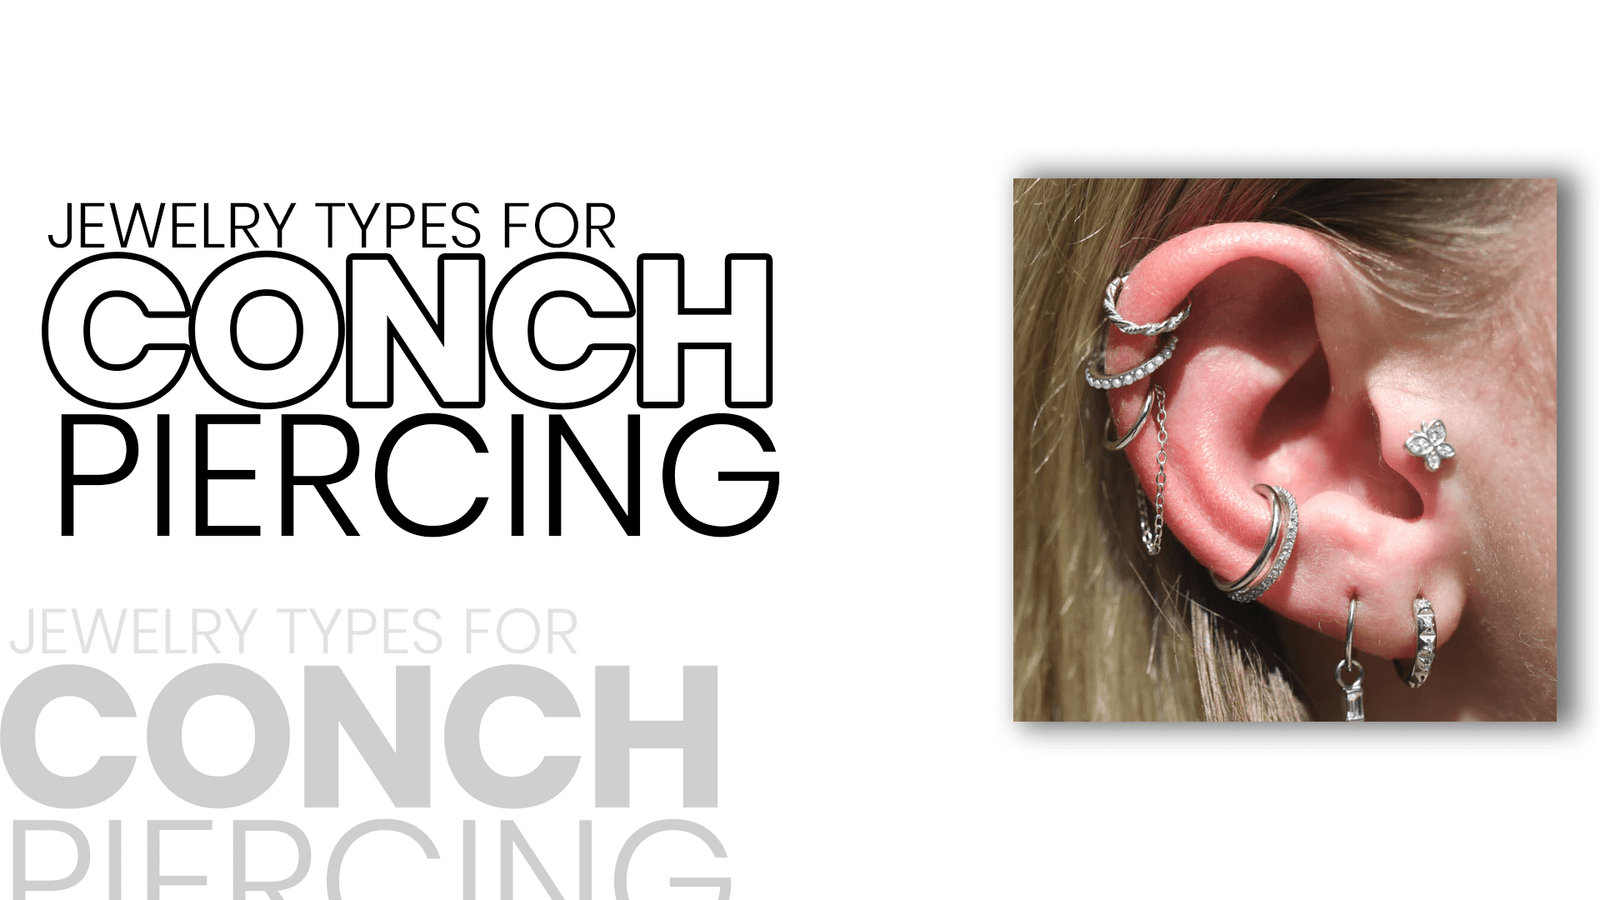 Jewelry Types for Conch Piercing